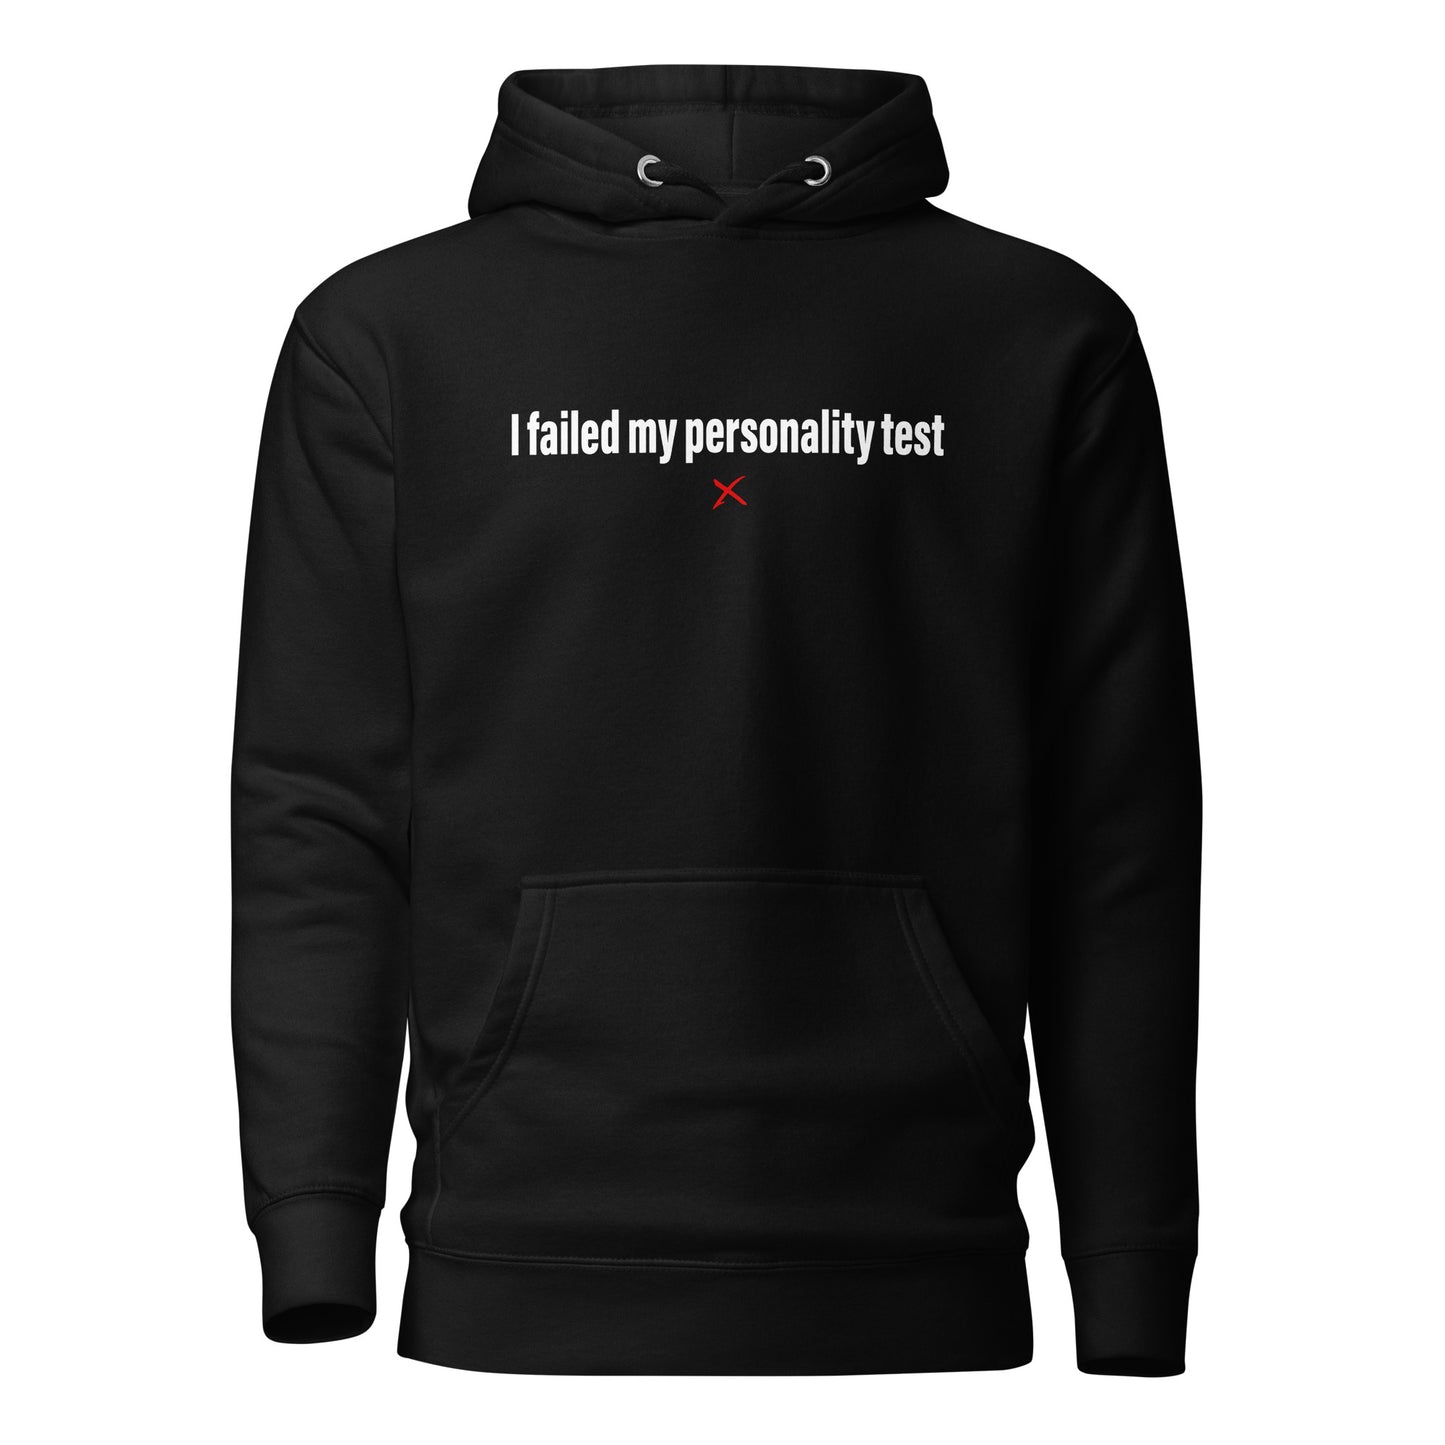 I failed my personality test - Hoodie